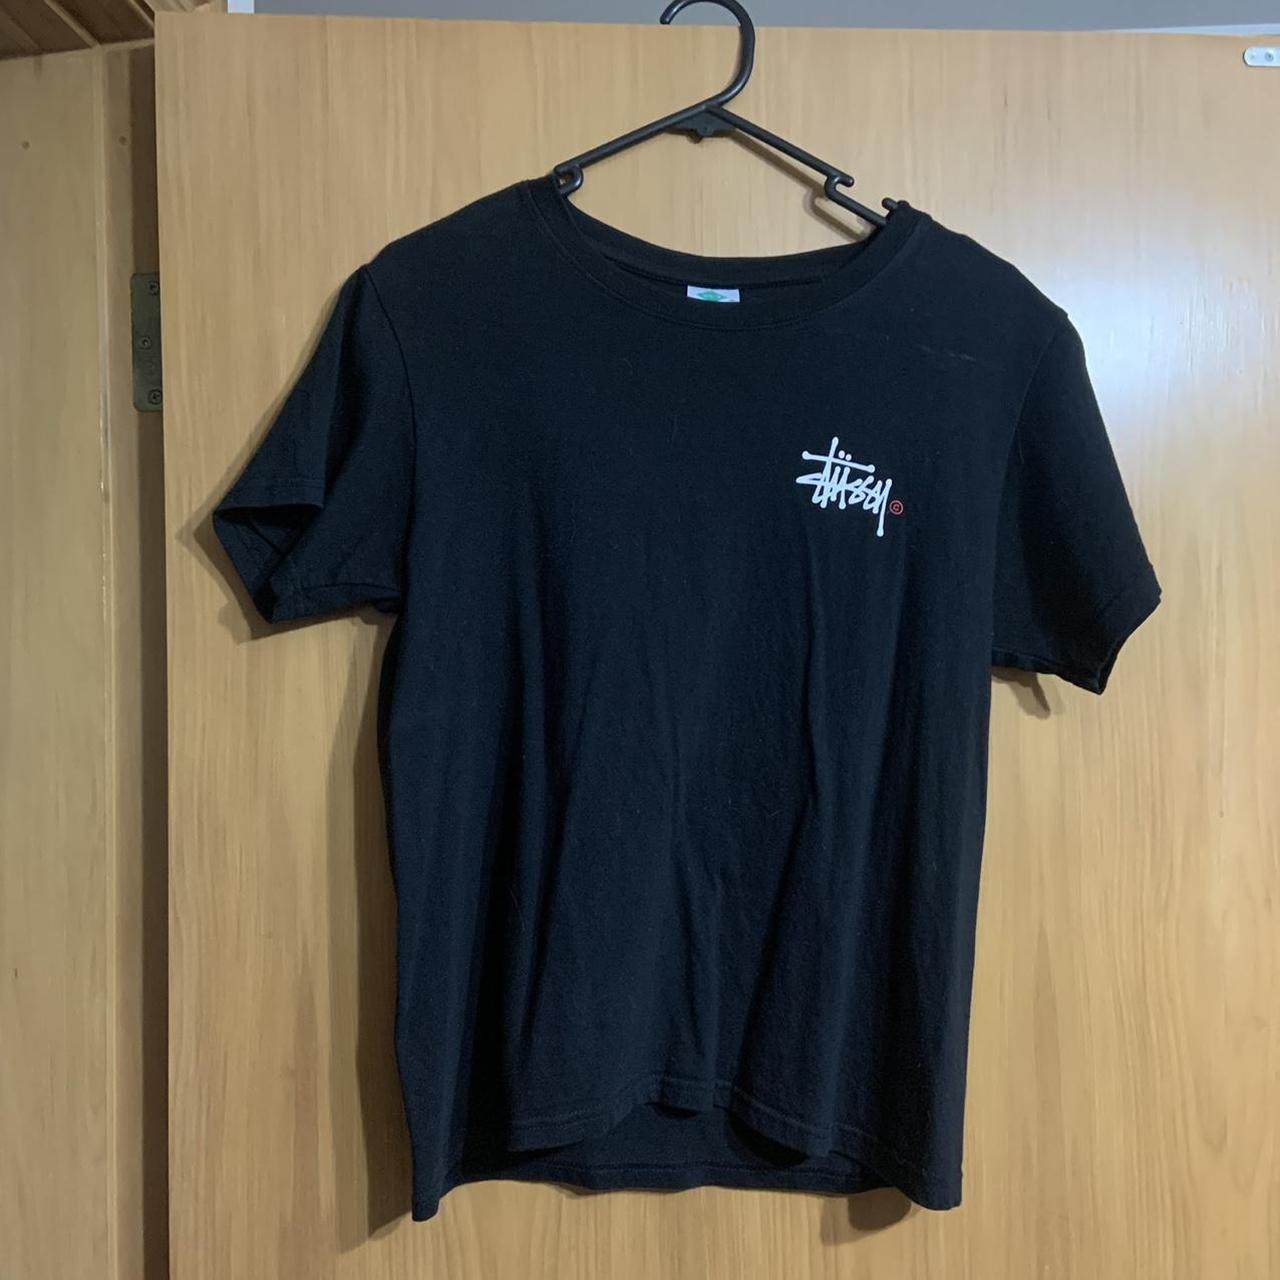 Stussy t shirt Size xs Good condition Only worn a... - Depop